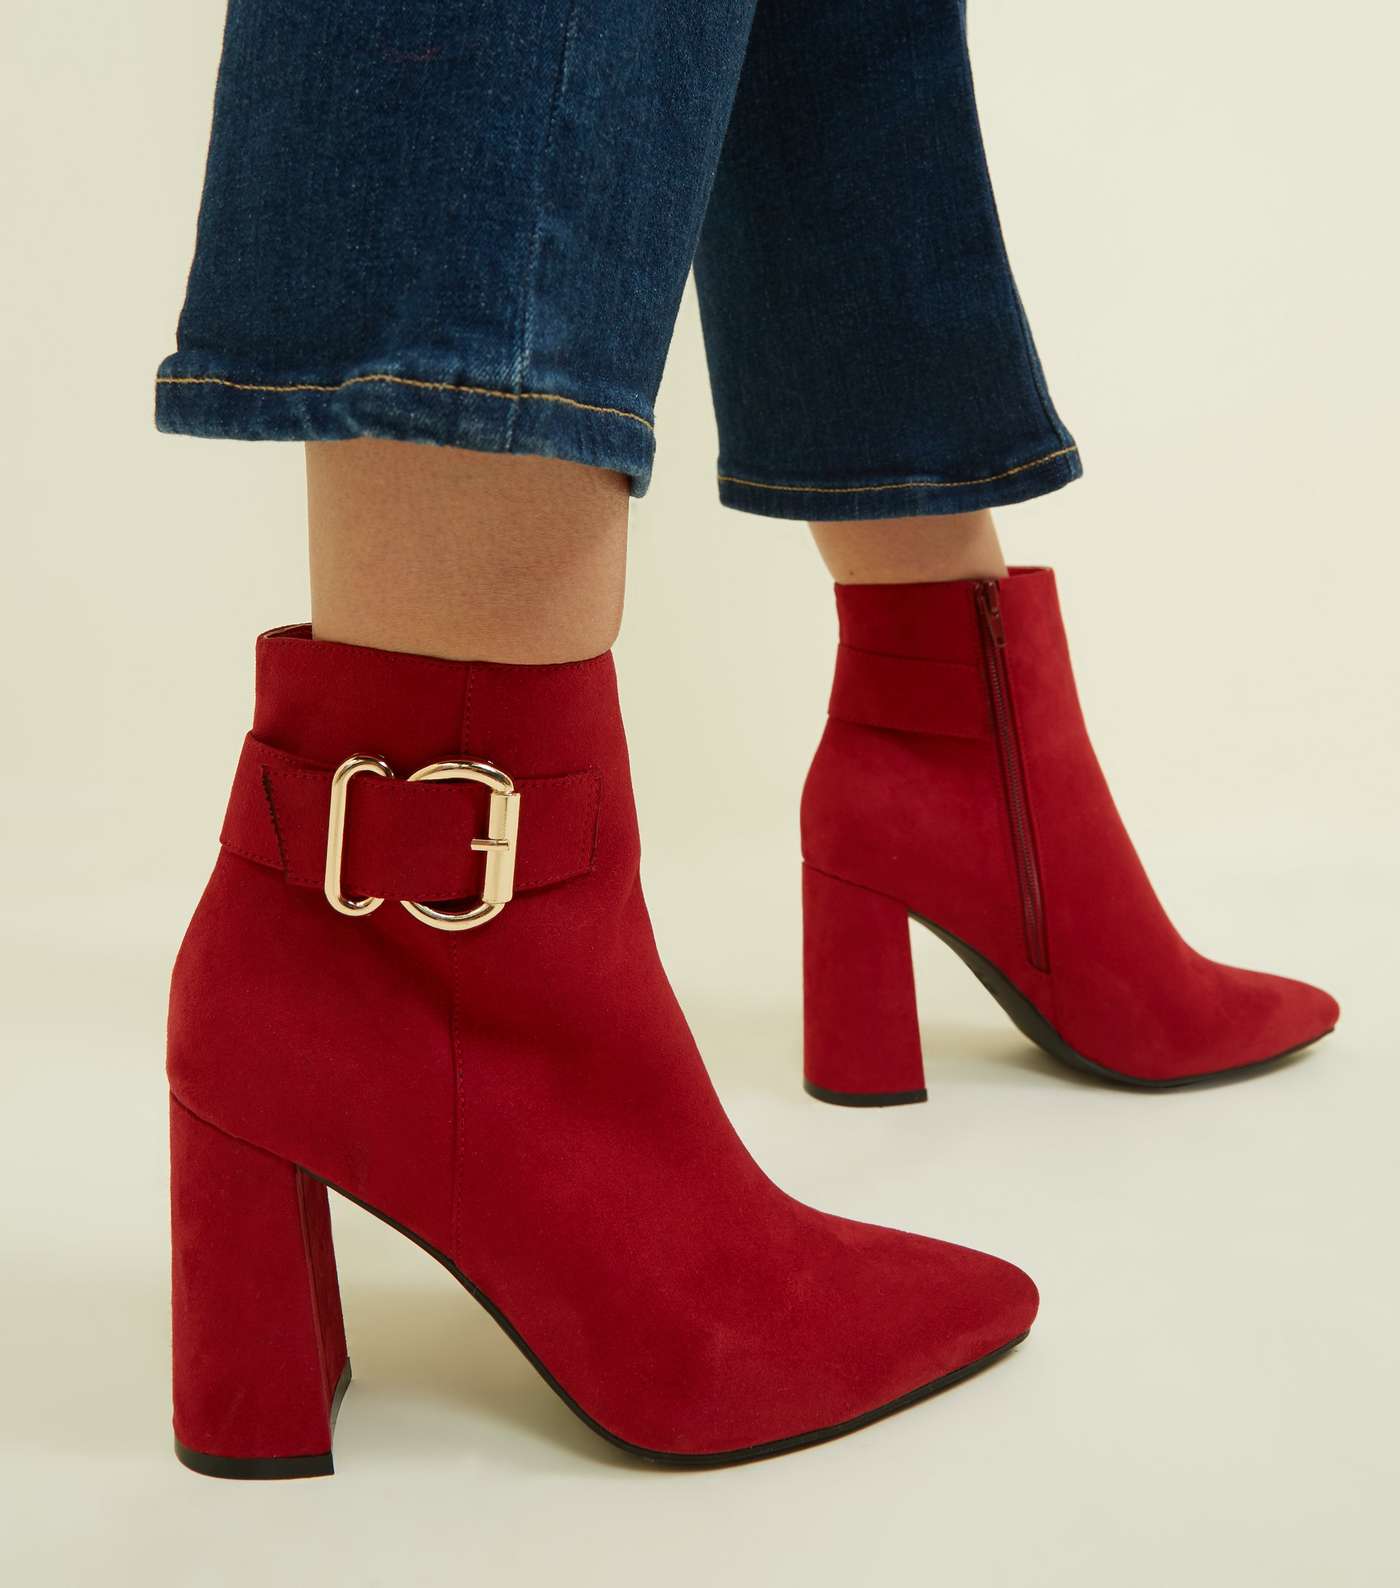 Red Suedette Buckle Side Flared Heel Boots Image 2